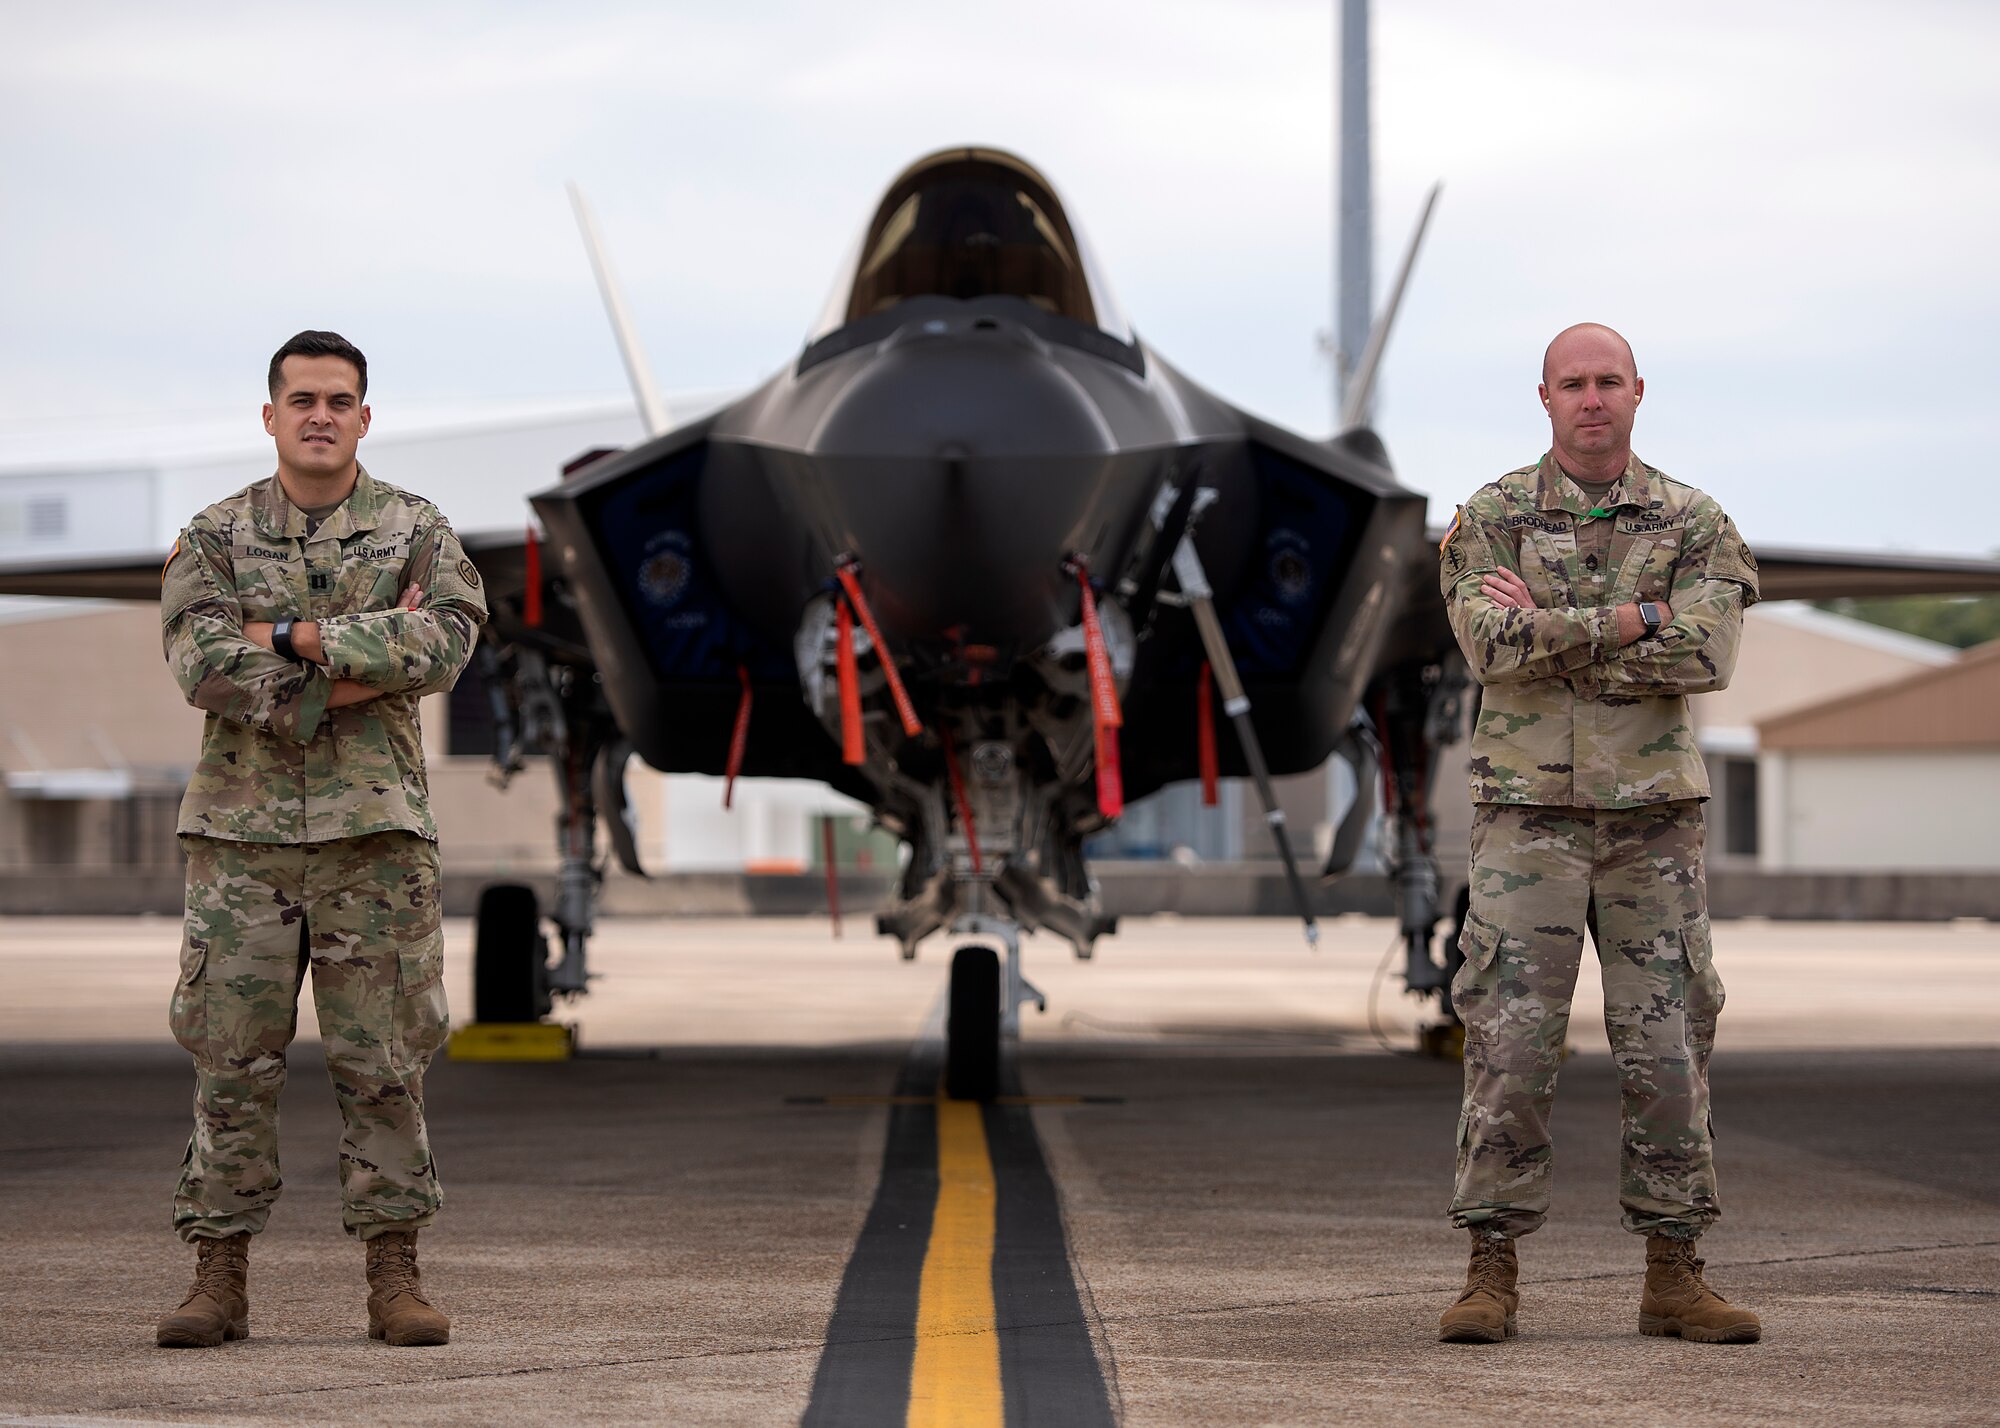 From left, U.S. Army Capt. John Logan and Sgt. 1st Class Patrick Brodhead, 33rd Operations Support Squadron ground liaison officers, stand in front of an F-35A Lightning II assigned to the 33rd Fighter Wing Nov. 6, 2018, at Eglin Air Force Base, Fla. Logan and Brodhead are the only Soldiers assigned to the 33rd FW, however their role is significant for the employment of the F-35A. As ground liaison officers their mission is to track, understand and brief the enemy ground formation from the battlefield to pilots and intelligence Airmen. (U.S. Air Force photo by Staff Sgt. Peter)